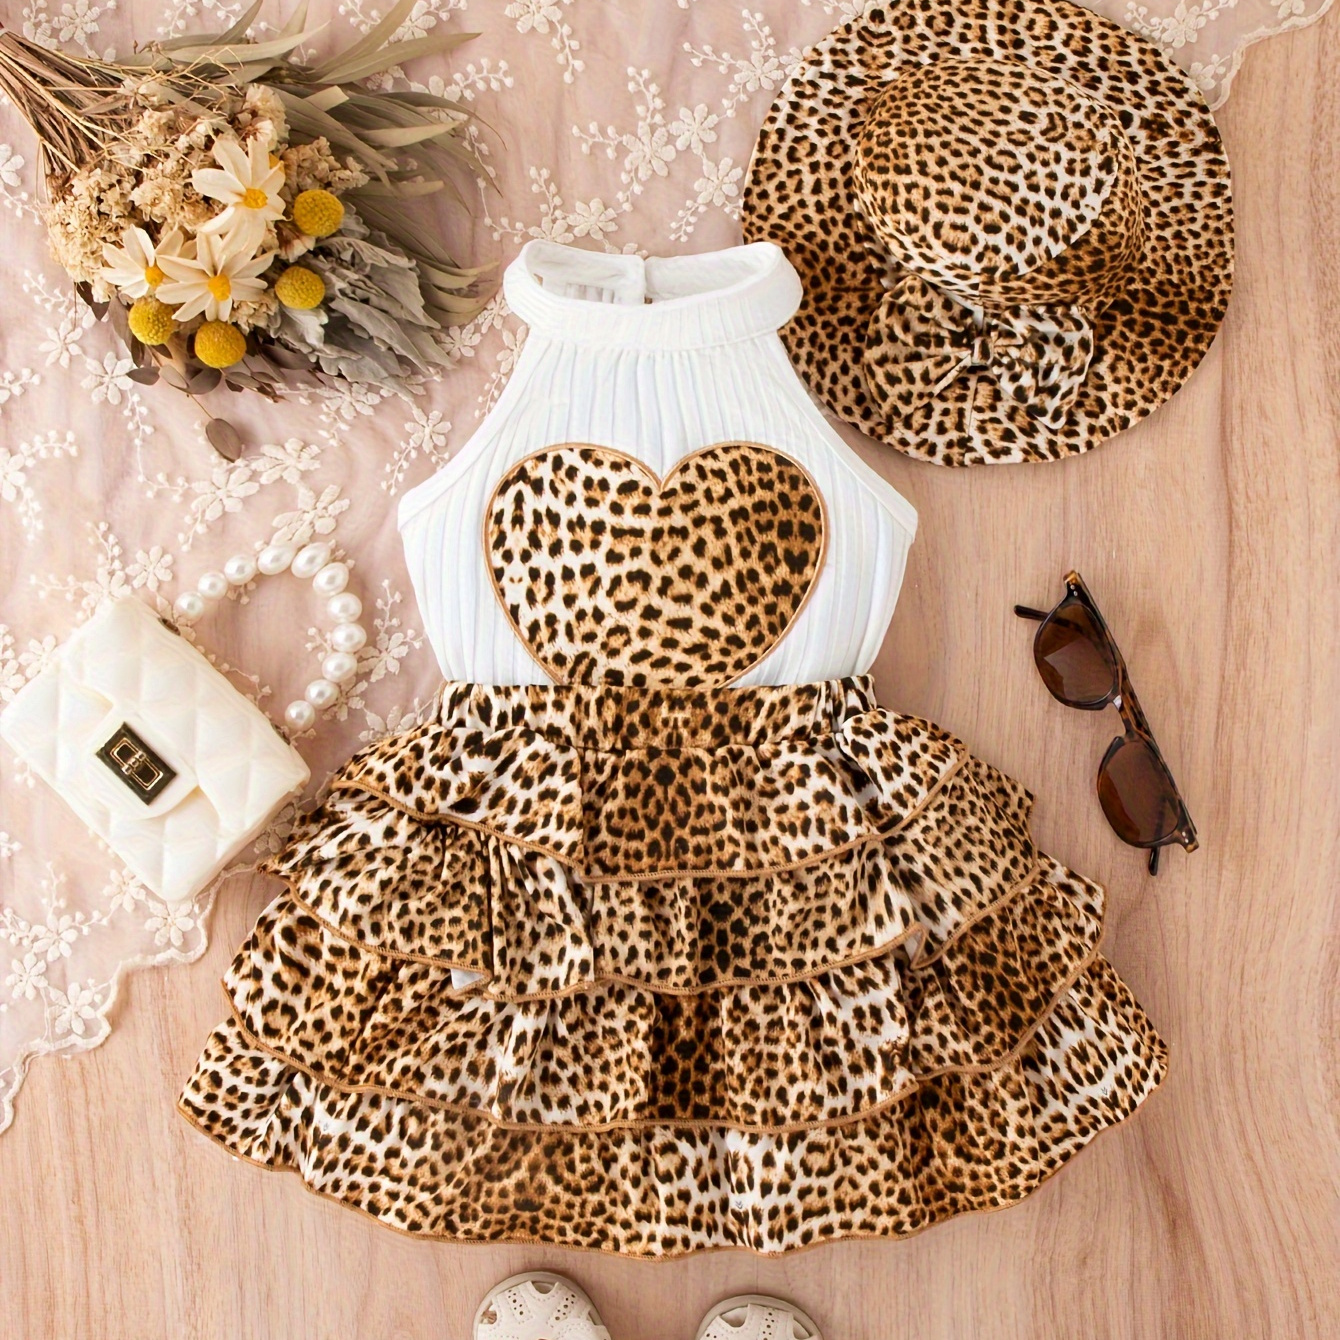 

Baby's Trendy Leopard Pattern 2pcs Summer Outfit, Halter Neck Sleeveless Top & Hat & Layered Skirt Set, Toddler & Infant Girl's Clothes For Daily/holiday, As Gift